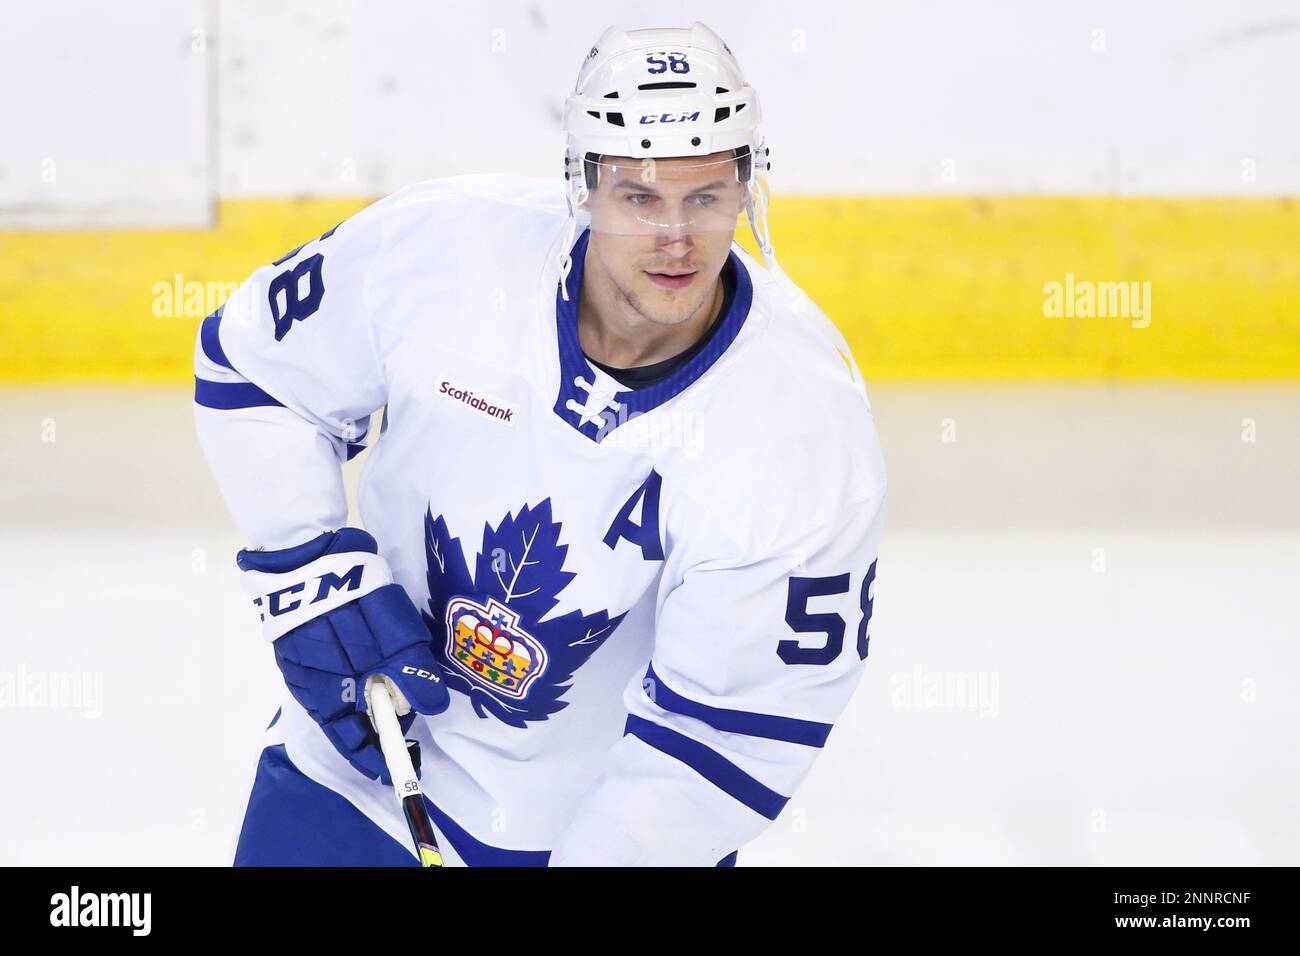 AHL (American Hockey League) profile photo on Toronto Marlies player Tyler Gaudet during a game against the Stockton Heat in Calgary, Ab. on Feb